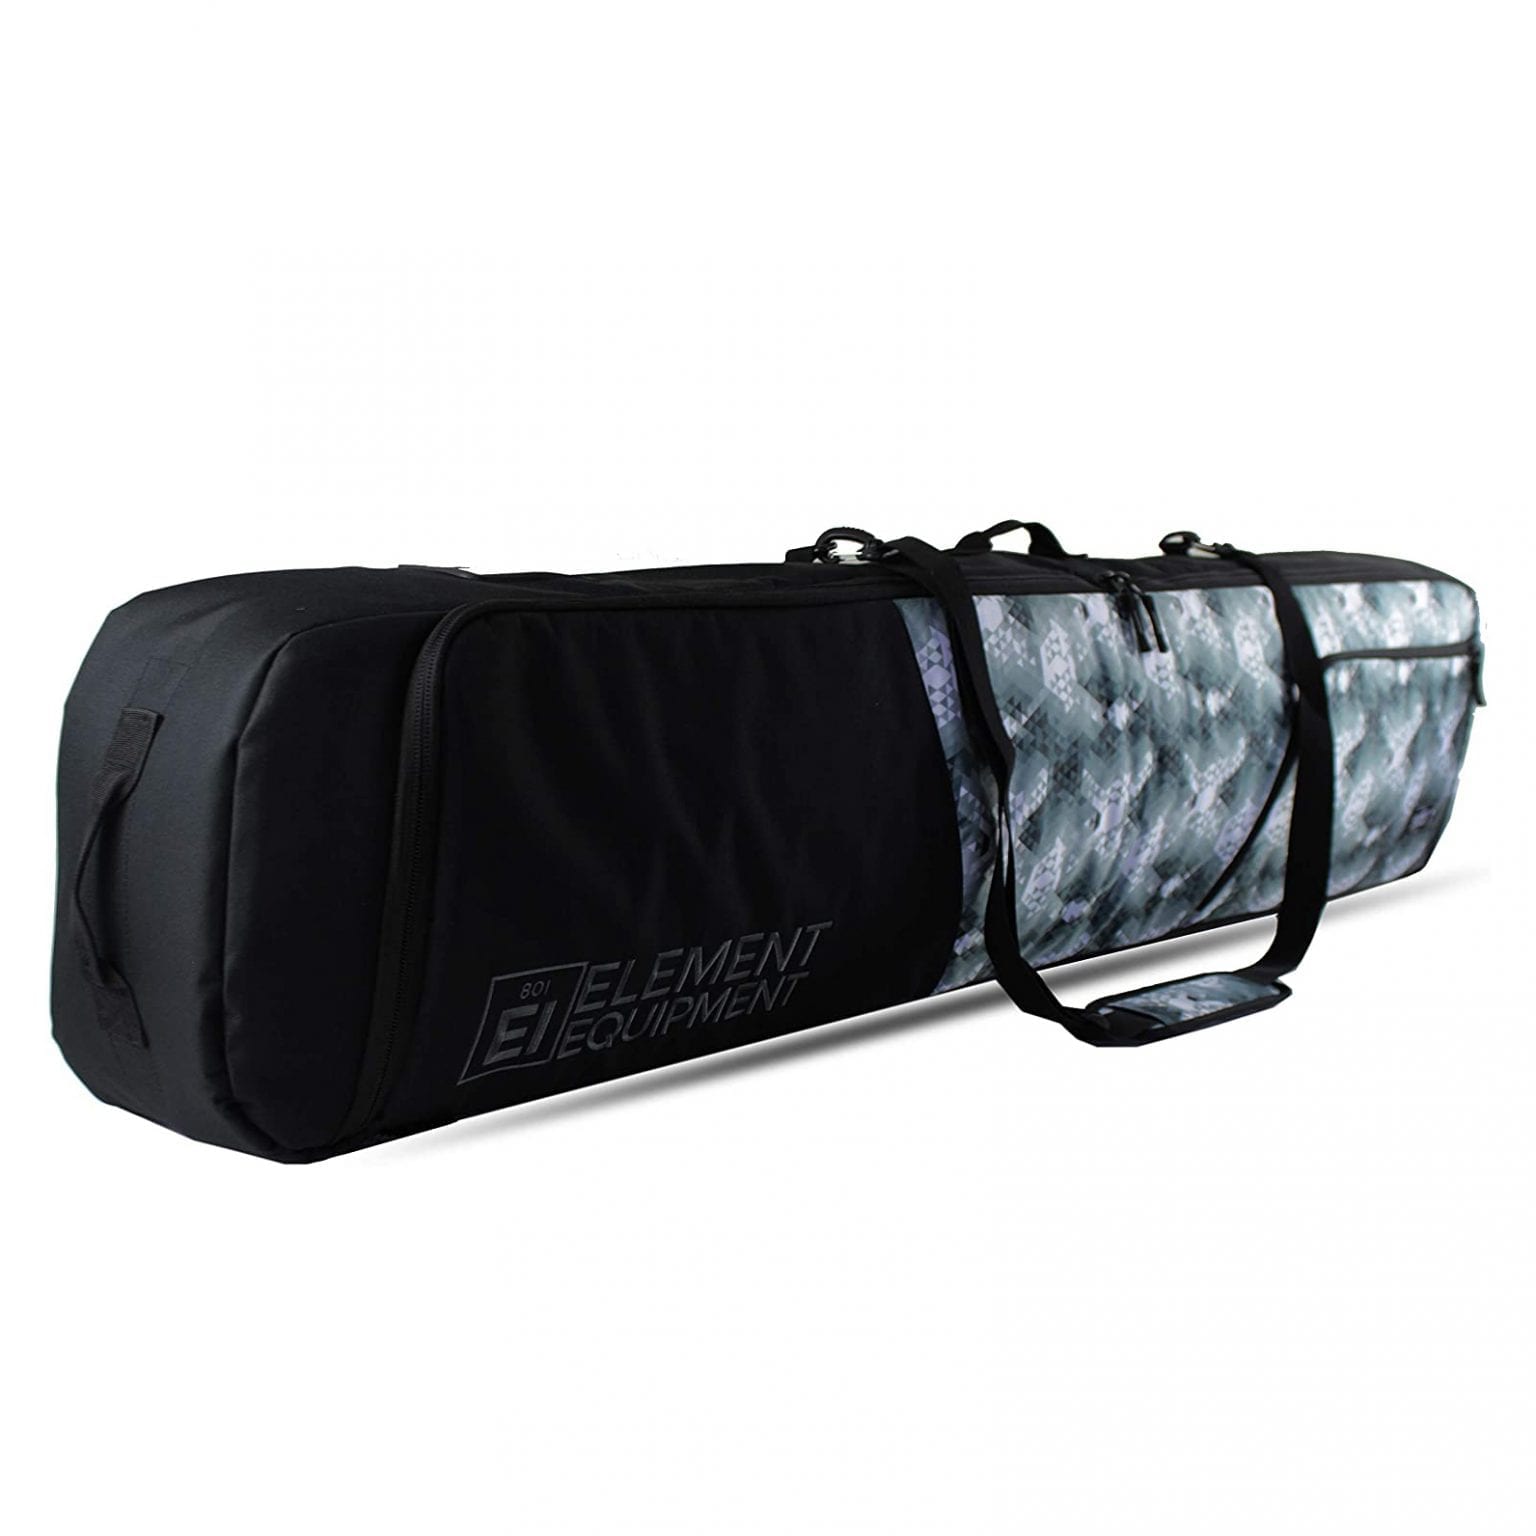 The 10 Best Snowboard Bags in 2021 Reviews Buyer's Guide